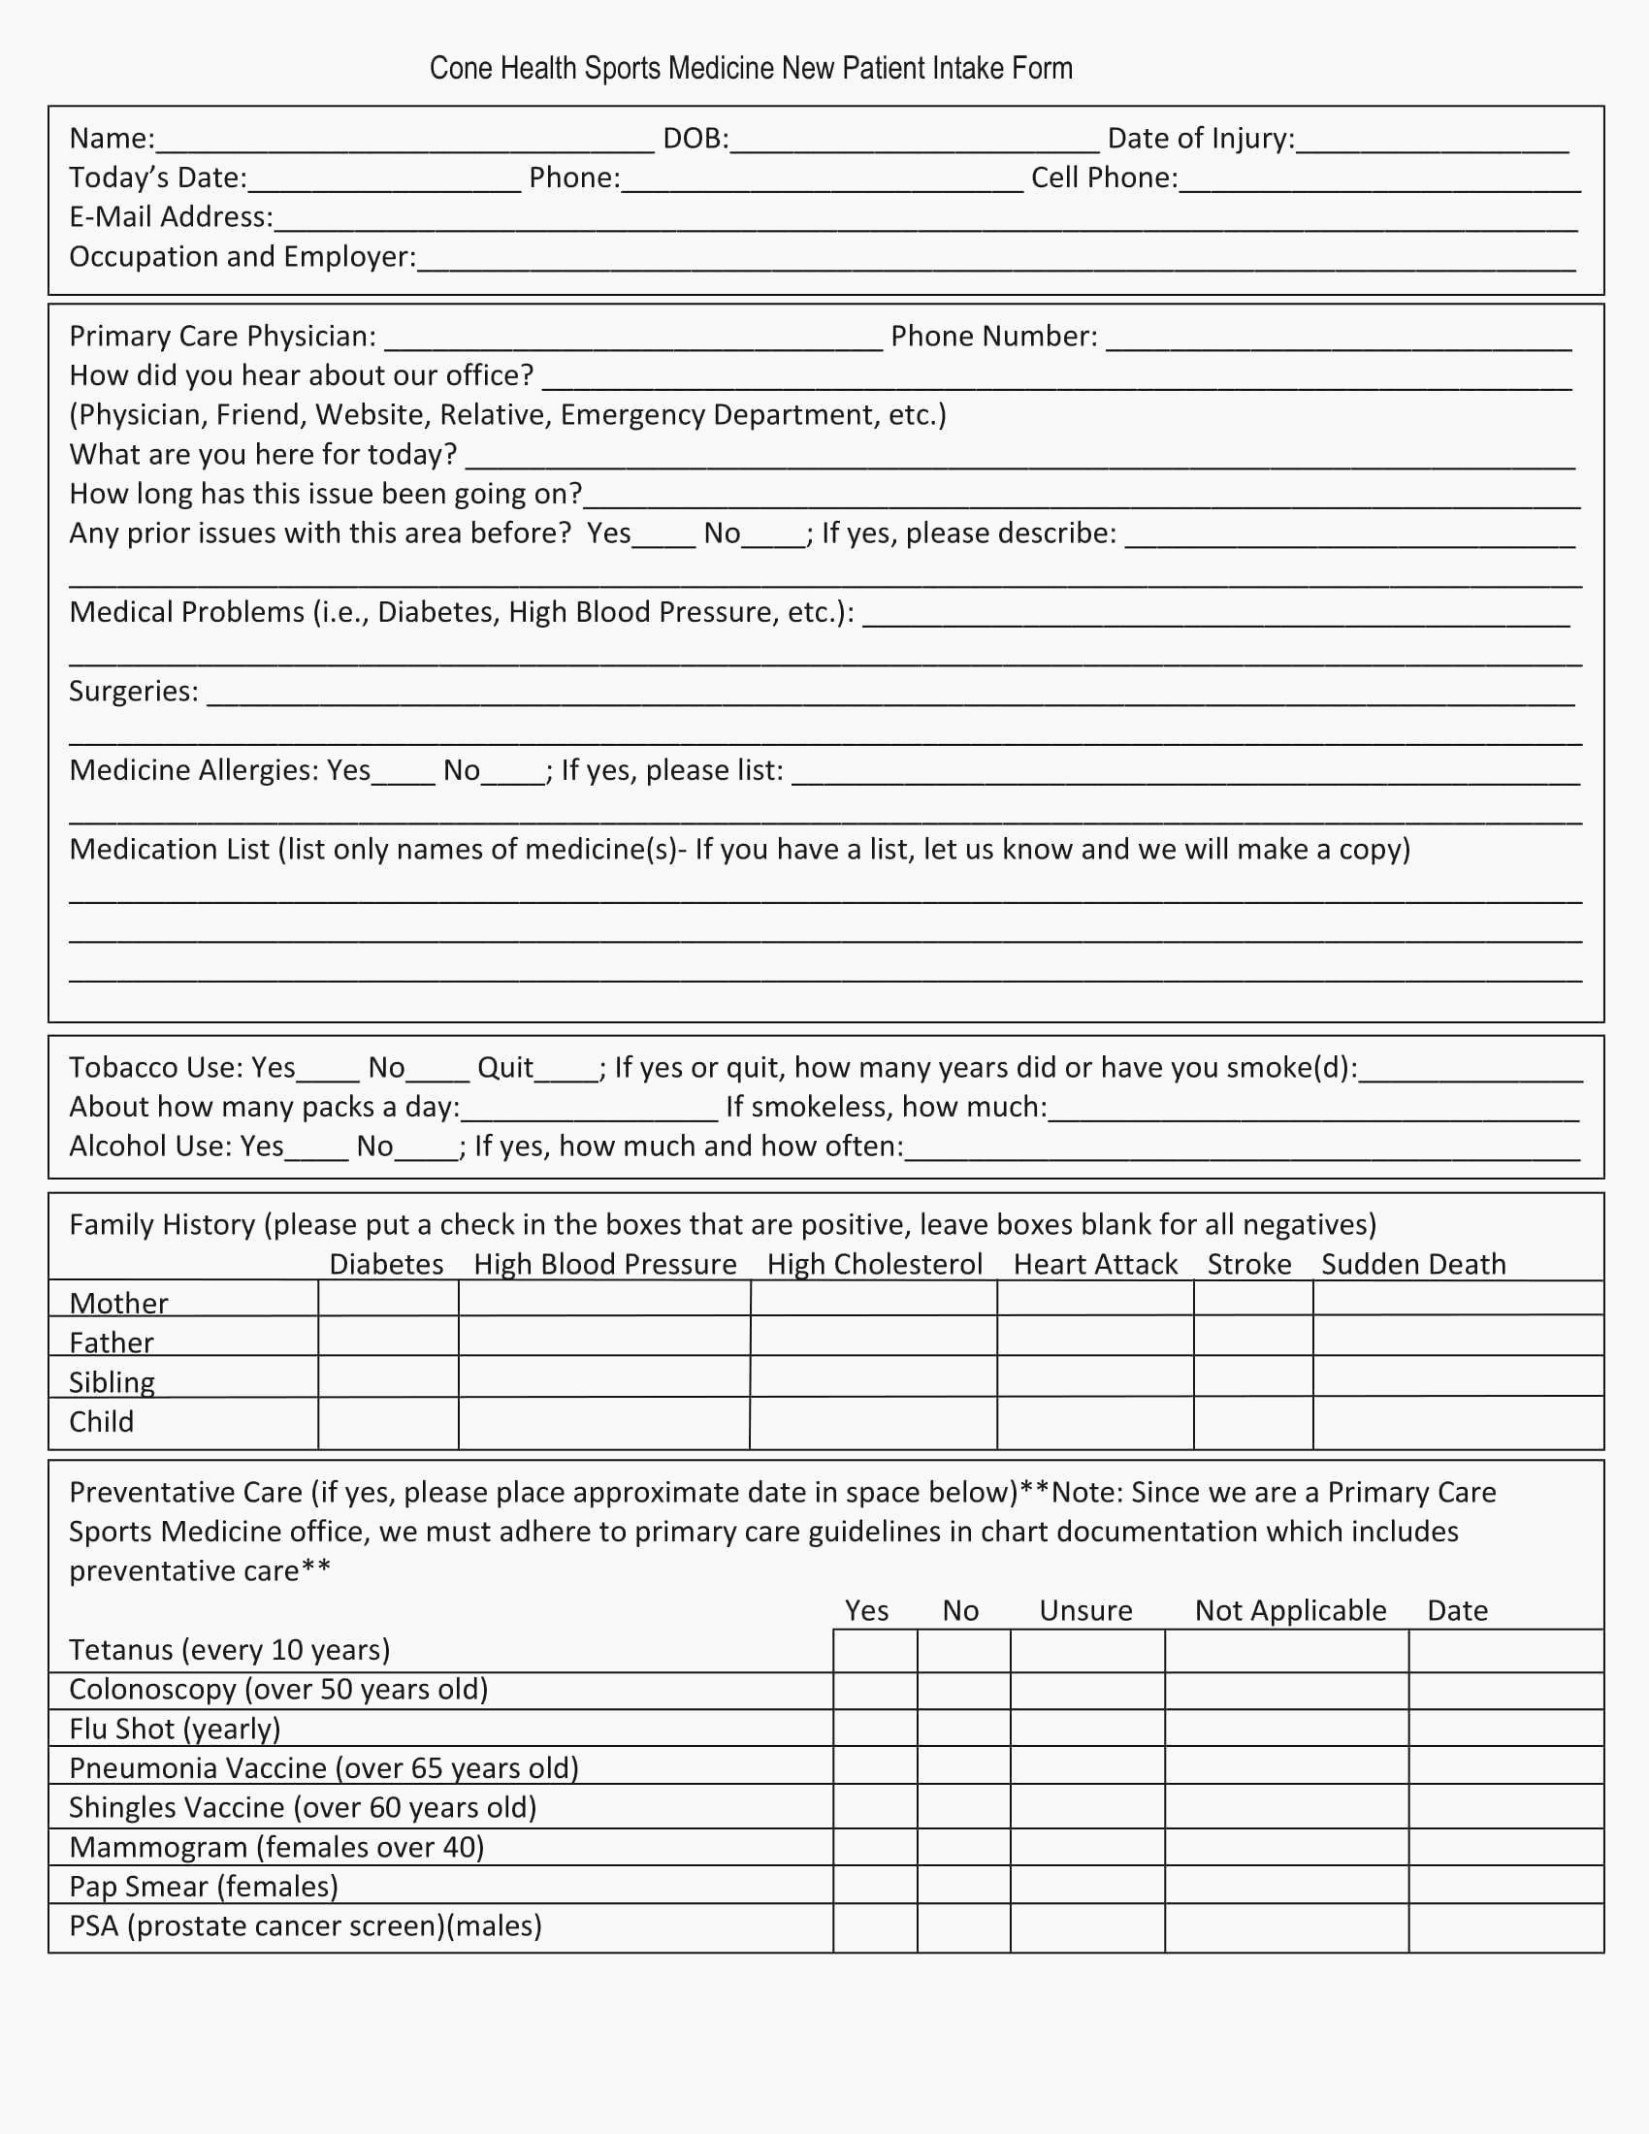 Free Patient Information form Template Unique the History Free New Patient